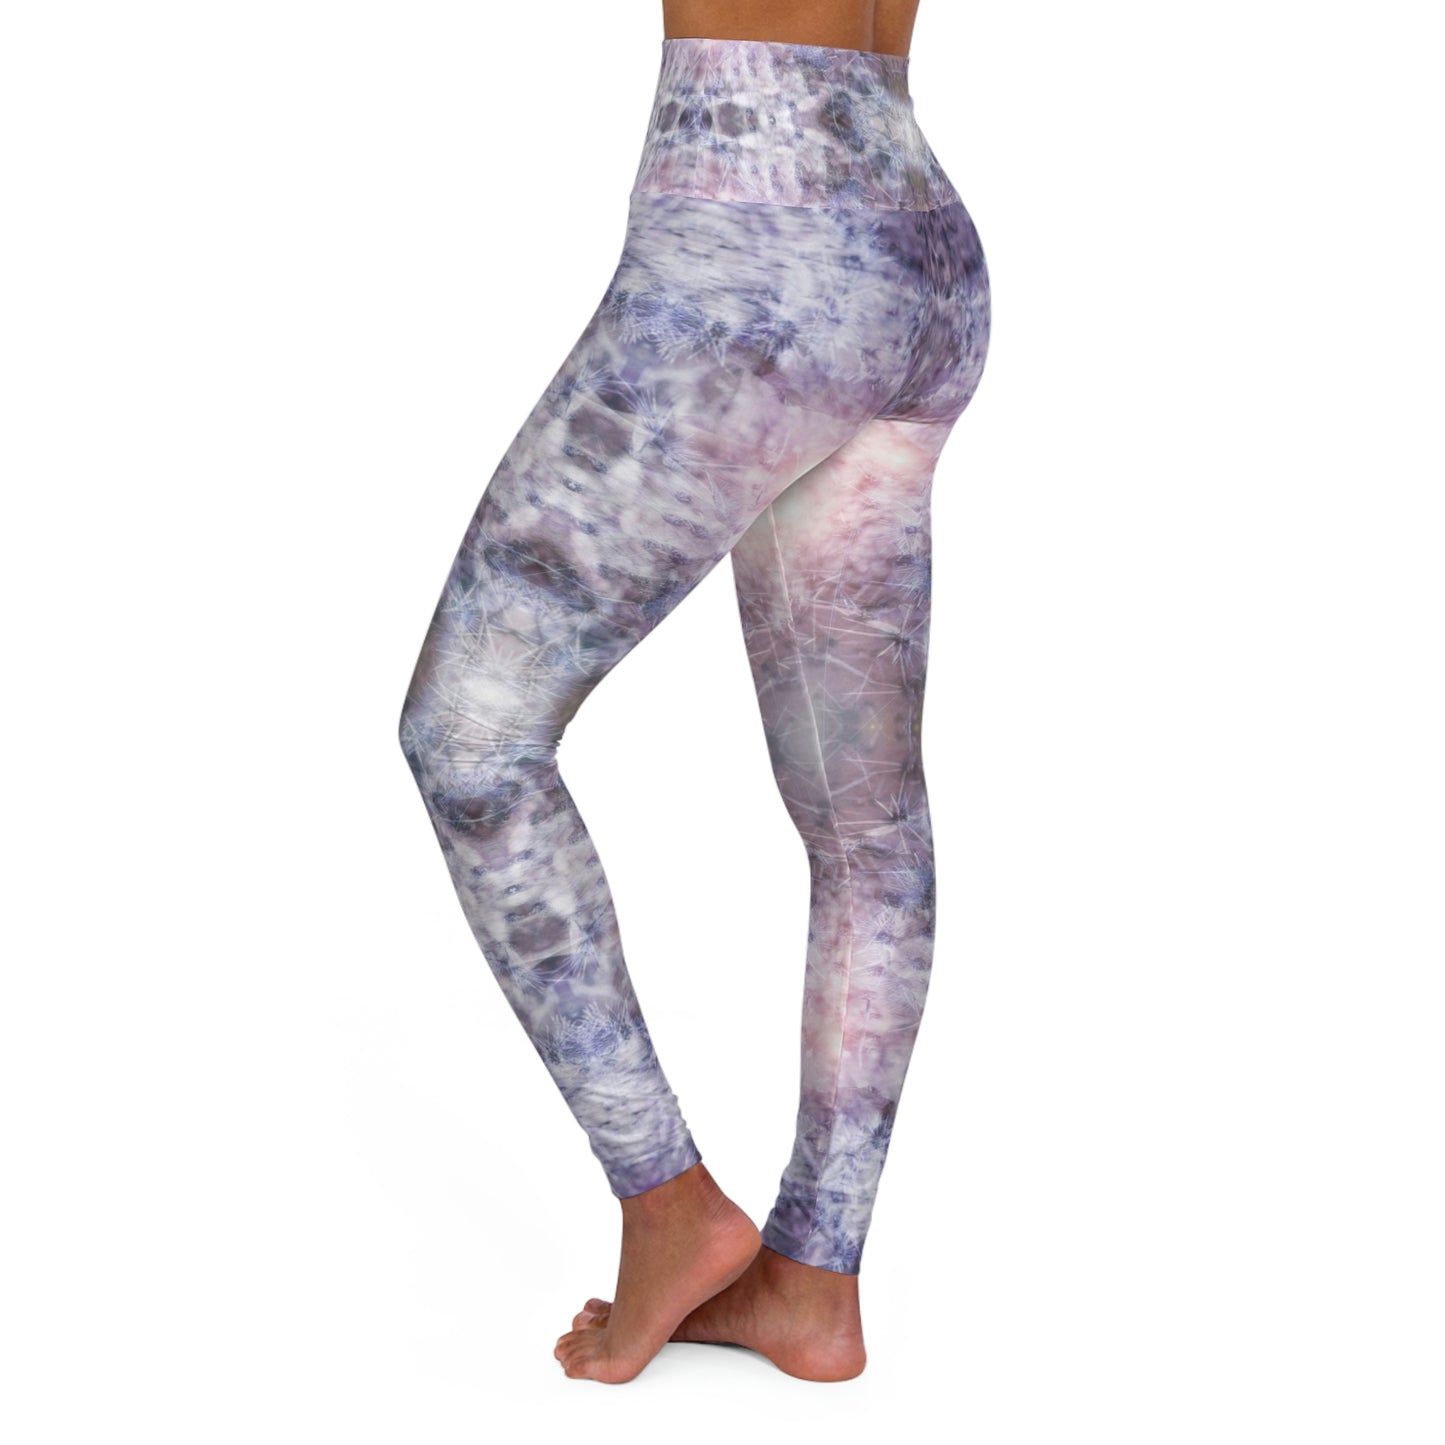 Cacti Connection High Waisted Yoga Leggings in color Dream